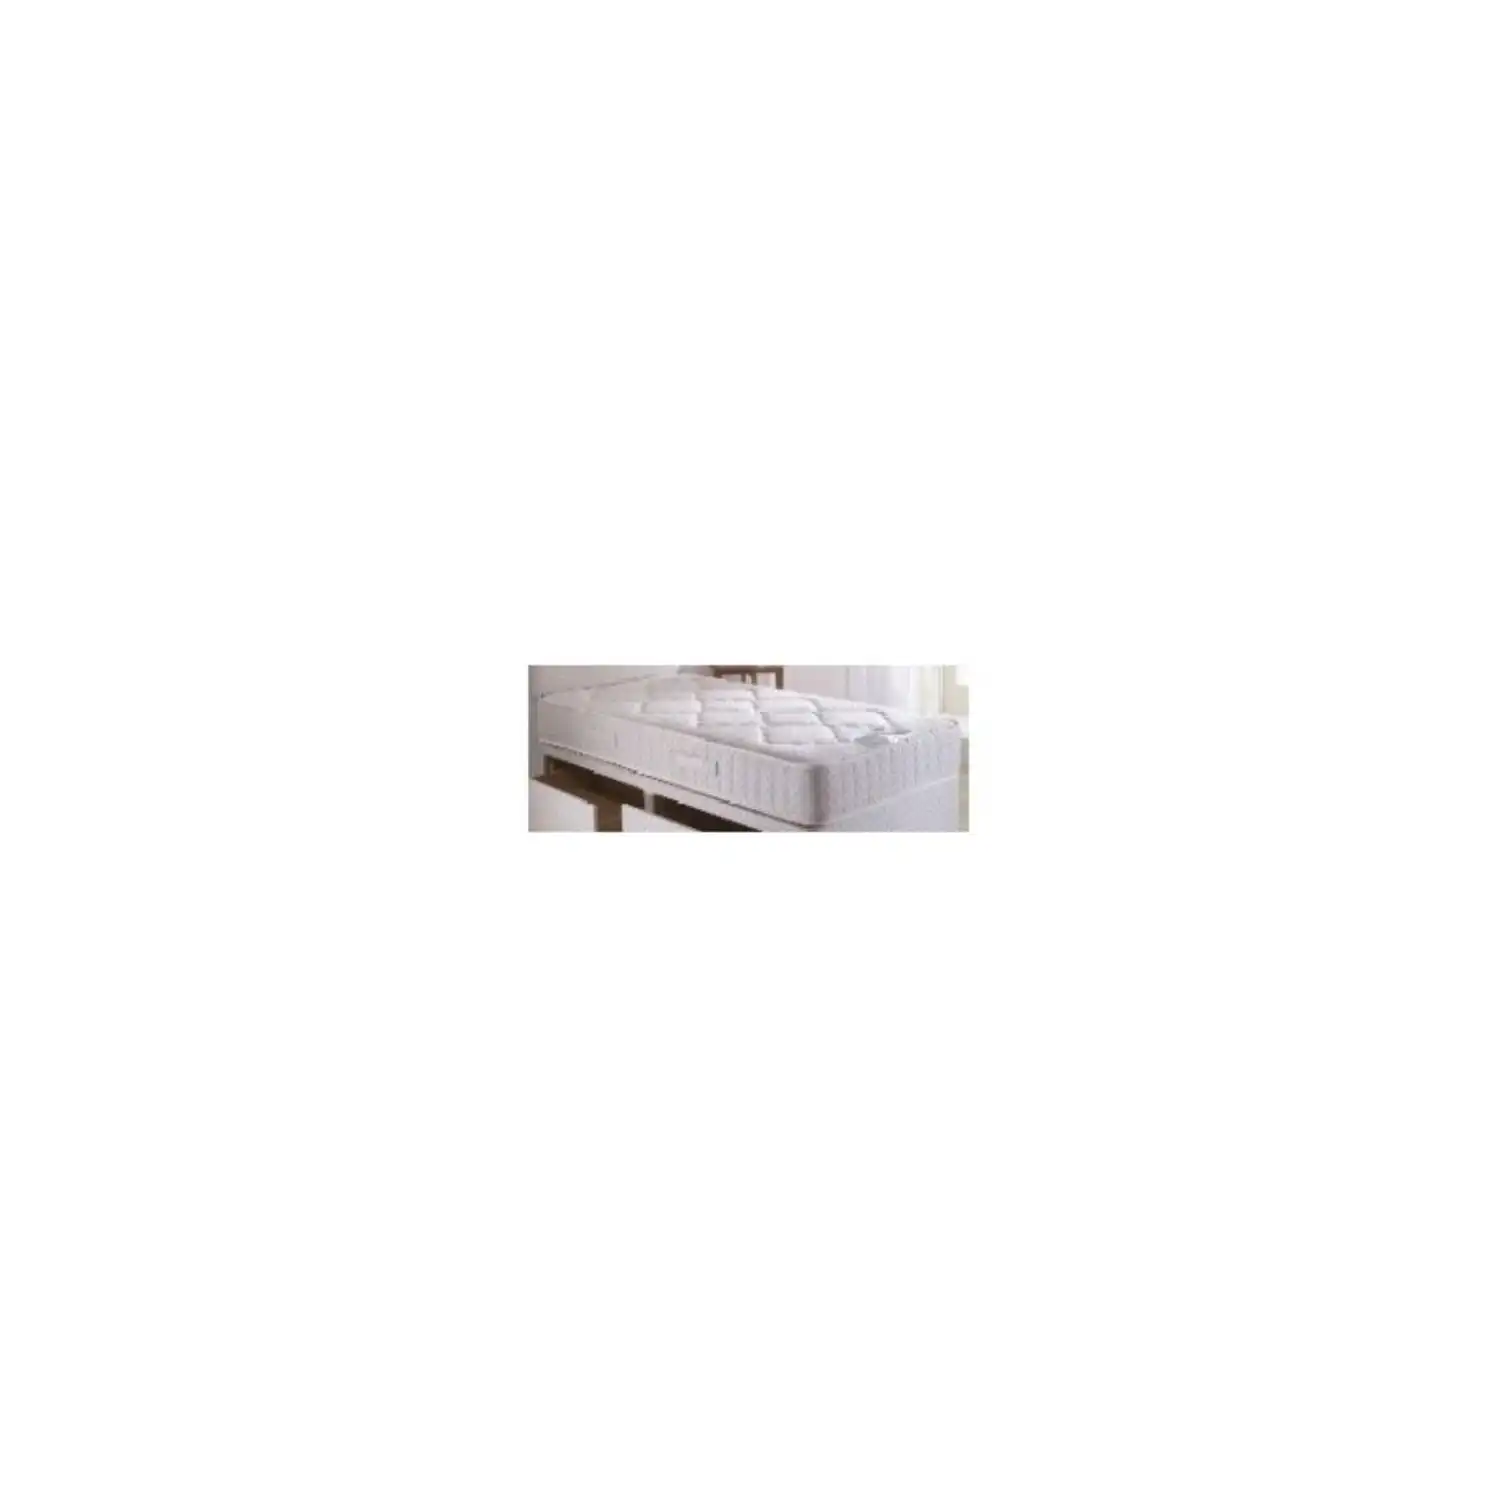 Contract Belfry MB245 Framed Spring Mattresses